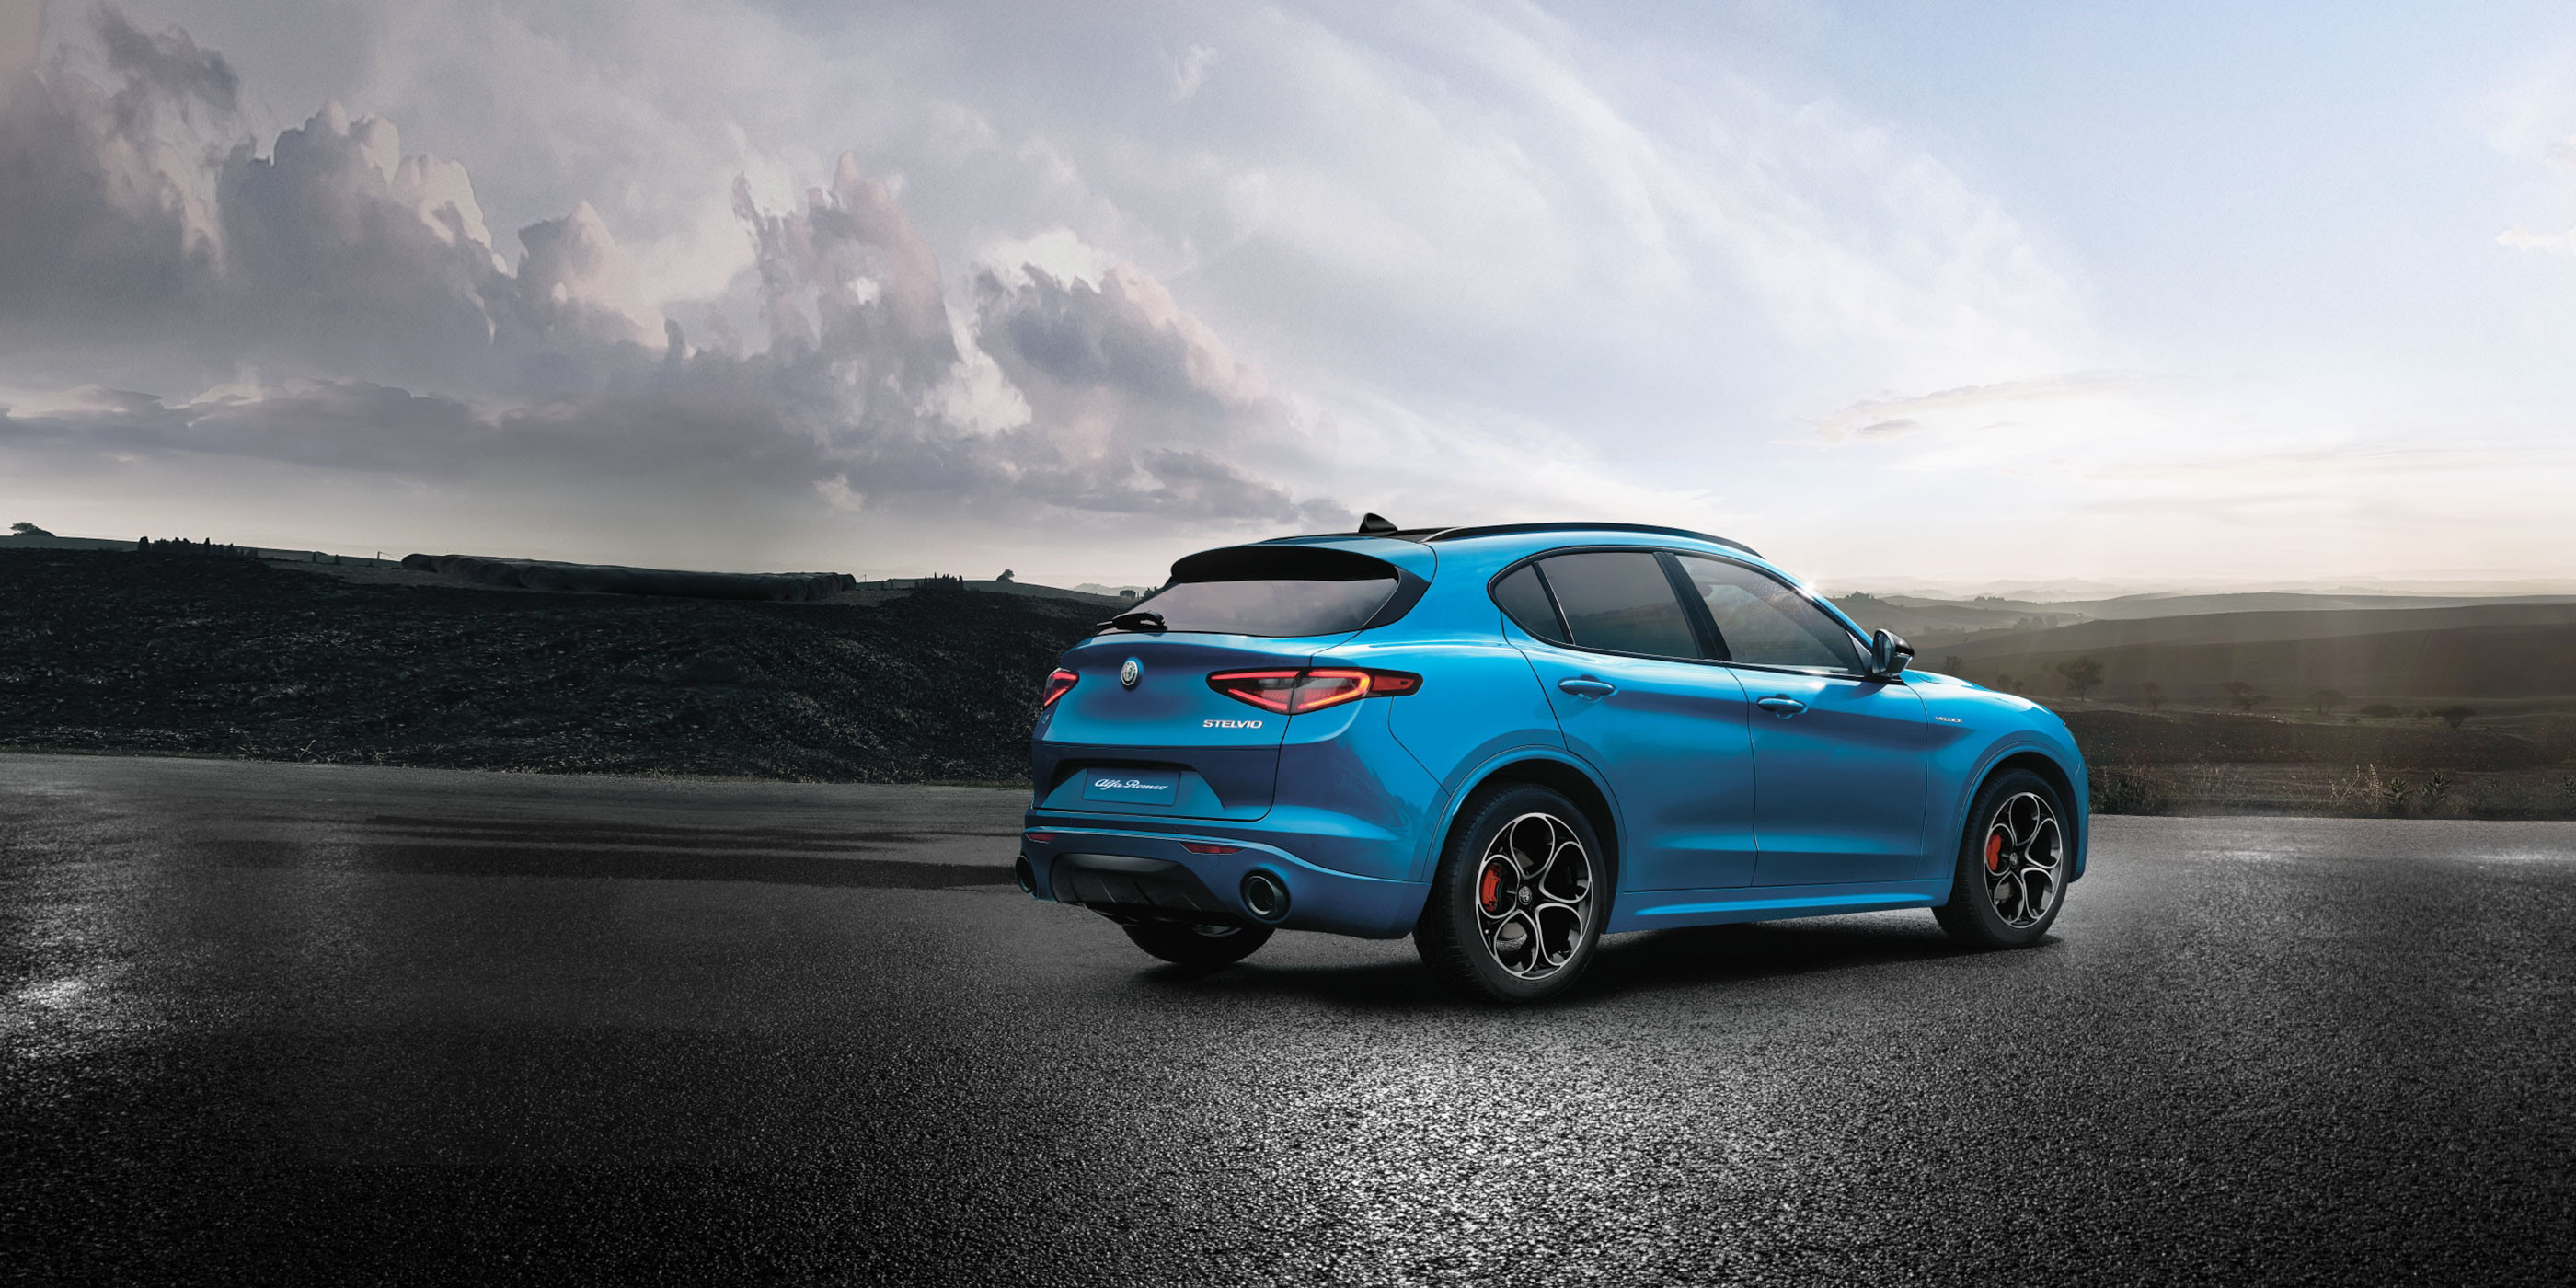 Front close-up view of blue 2023 Alfa Romeo Stelvio driving on the road with rock mountains in the background.



